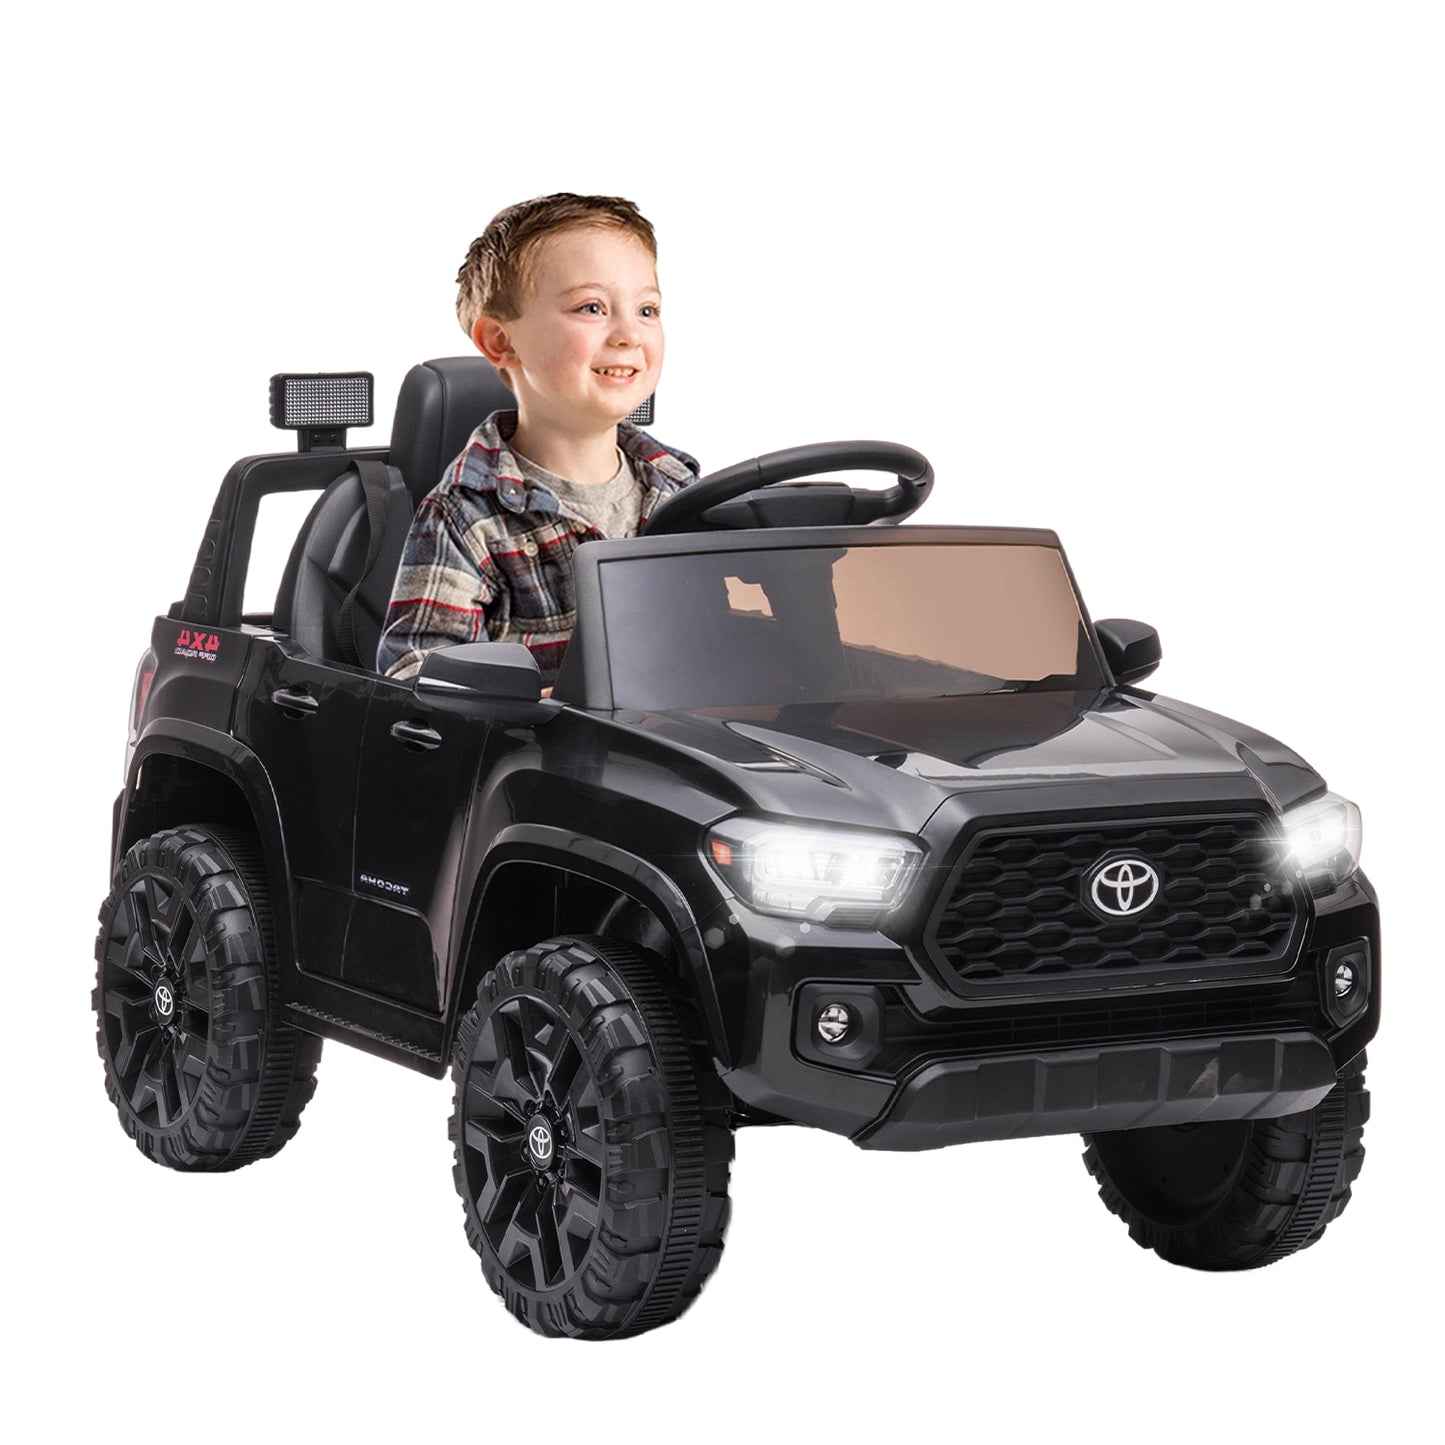 SYNGAR Licensed Toyota Tacoma 12 V Electric Ride on Car for Kids, Black Battery Powered Truck Toy with Remote Control, LED Light and MP3 Player